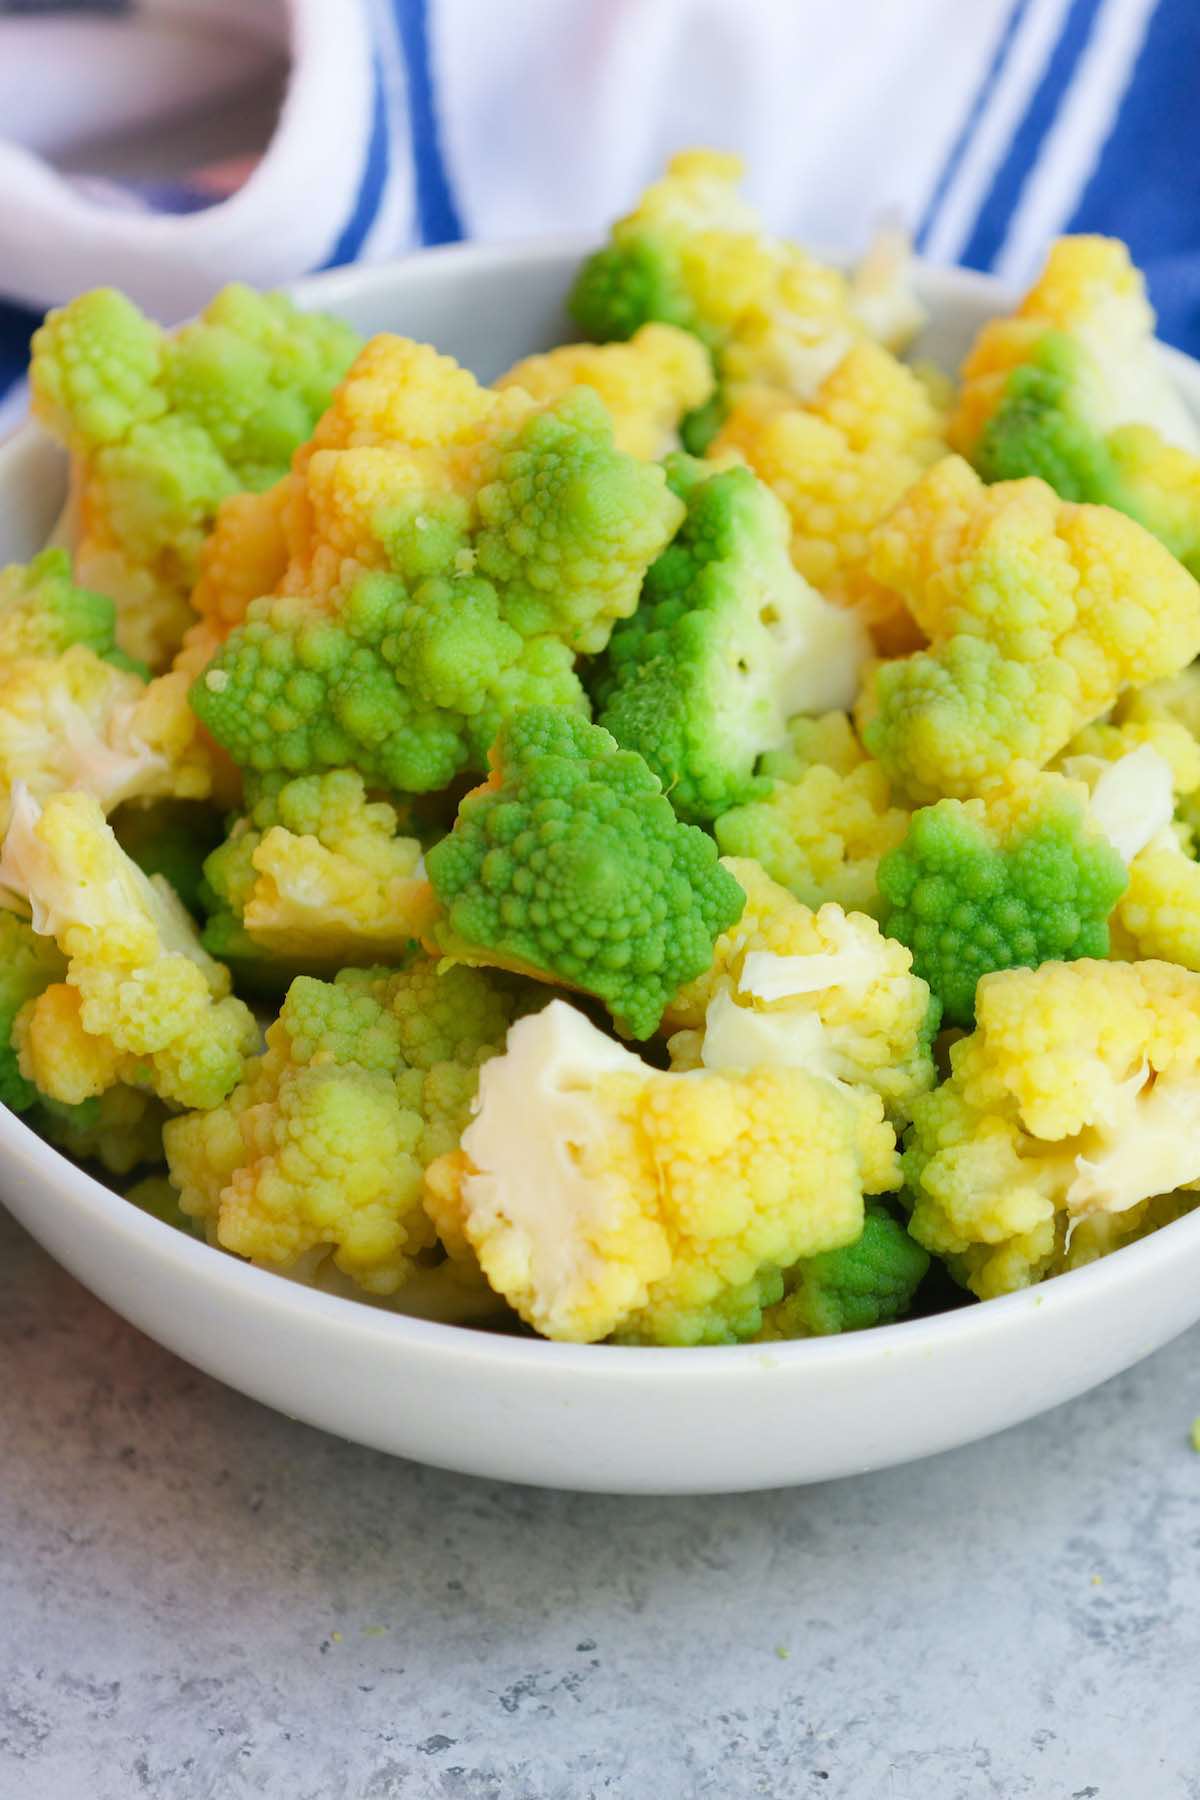 A colorful serving of boiled romanesco